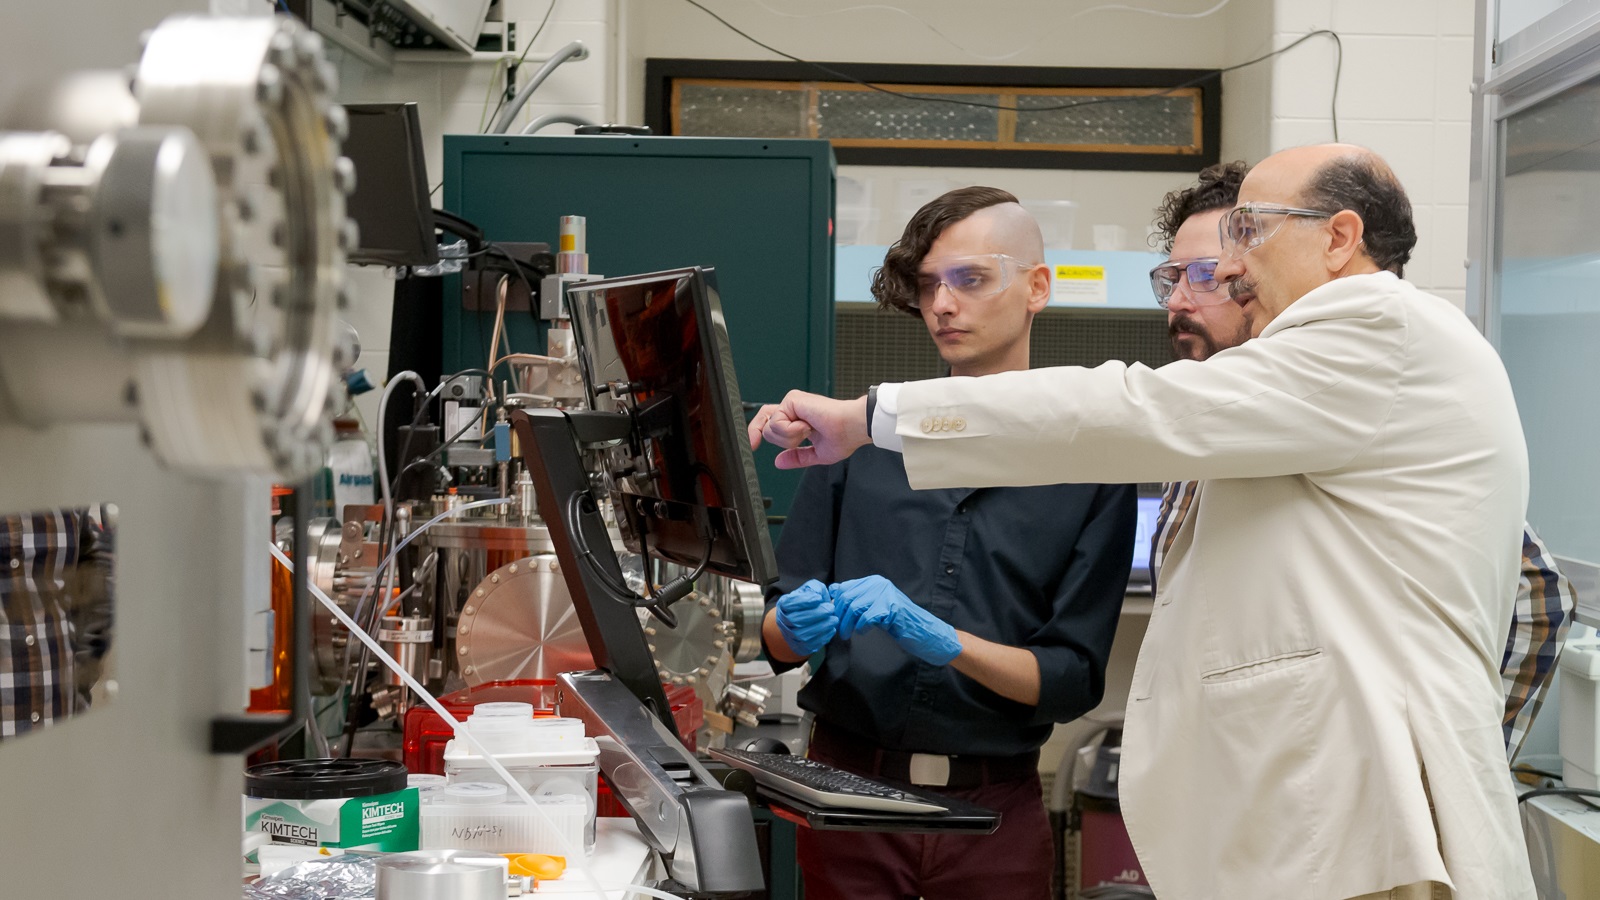 Argonne scientists at nanowire fabrication machine. Left to right: T. Polakovic, W.R. Armstrong and Z.-E. Meziani. (Image by Argonne National Laboratory.)